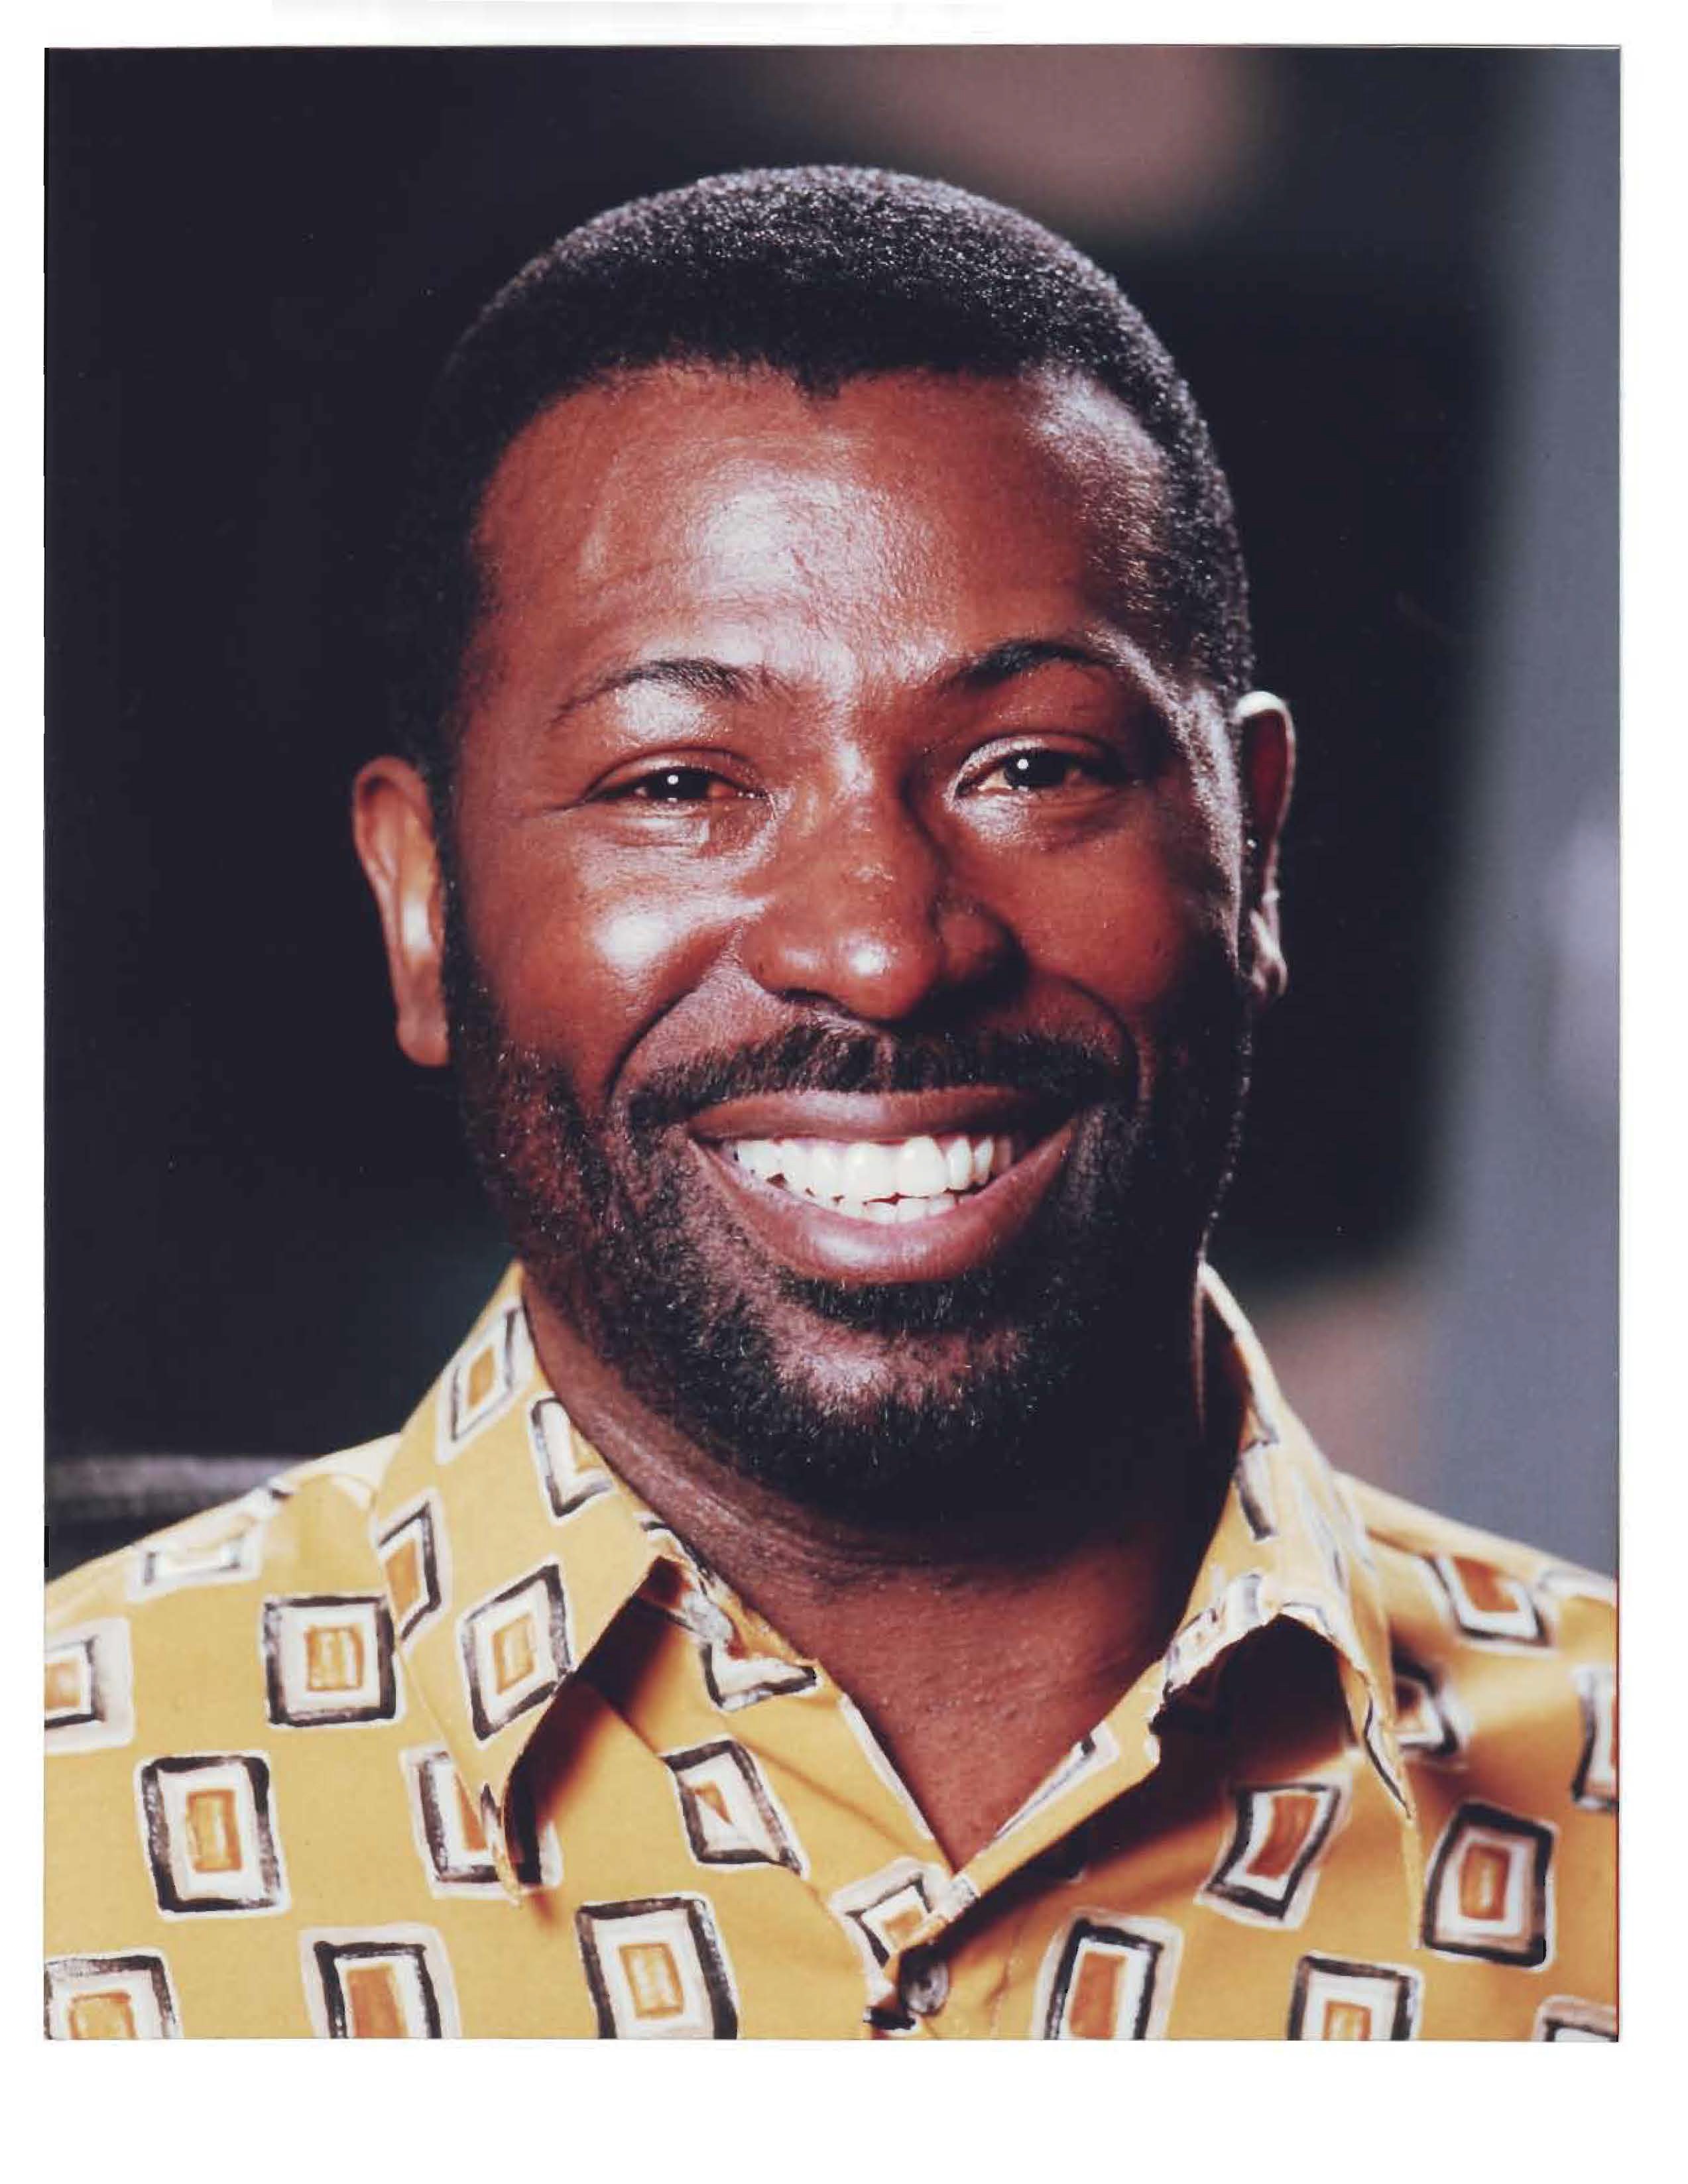 Photo of Teddy Pendergrass for fans of 80's music. 